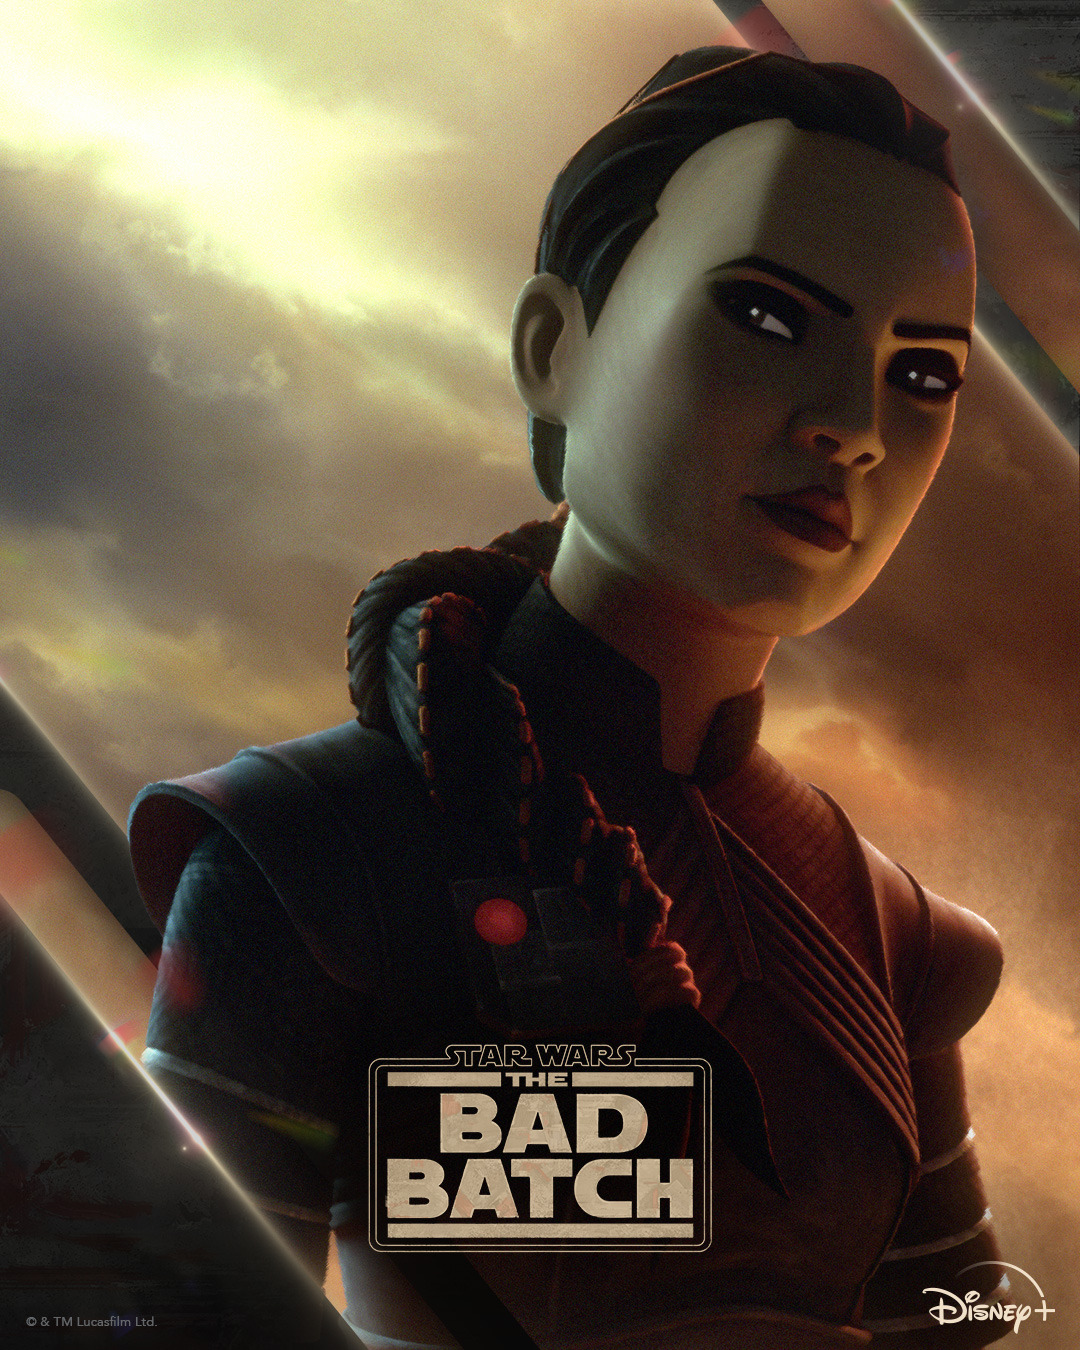 Extra Large TV Poster Image for Star Wars: The Bad Batch (#58 of 60)